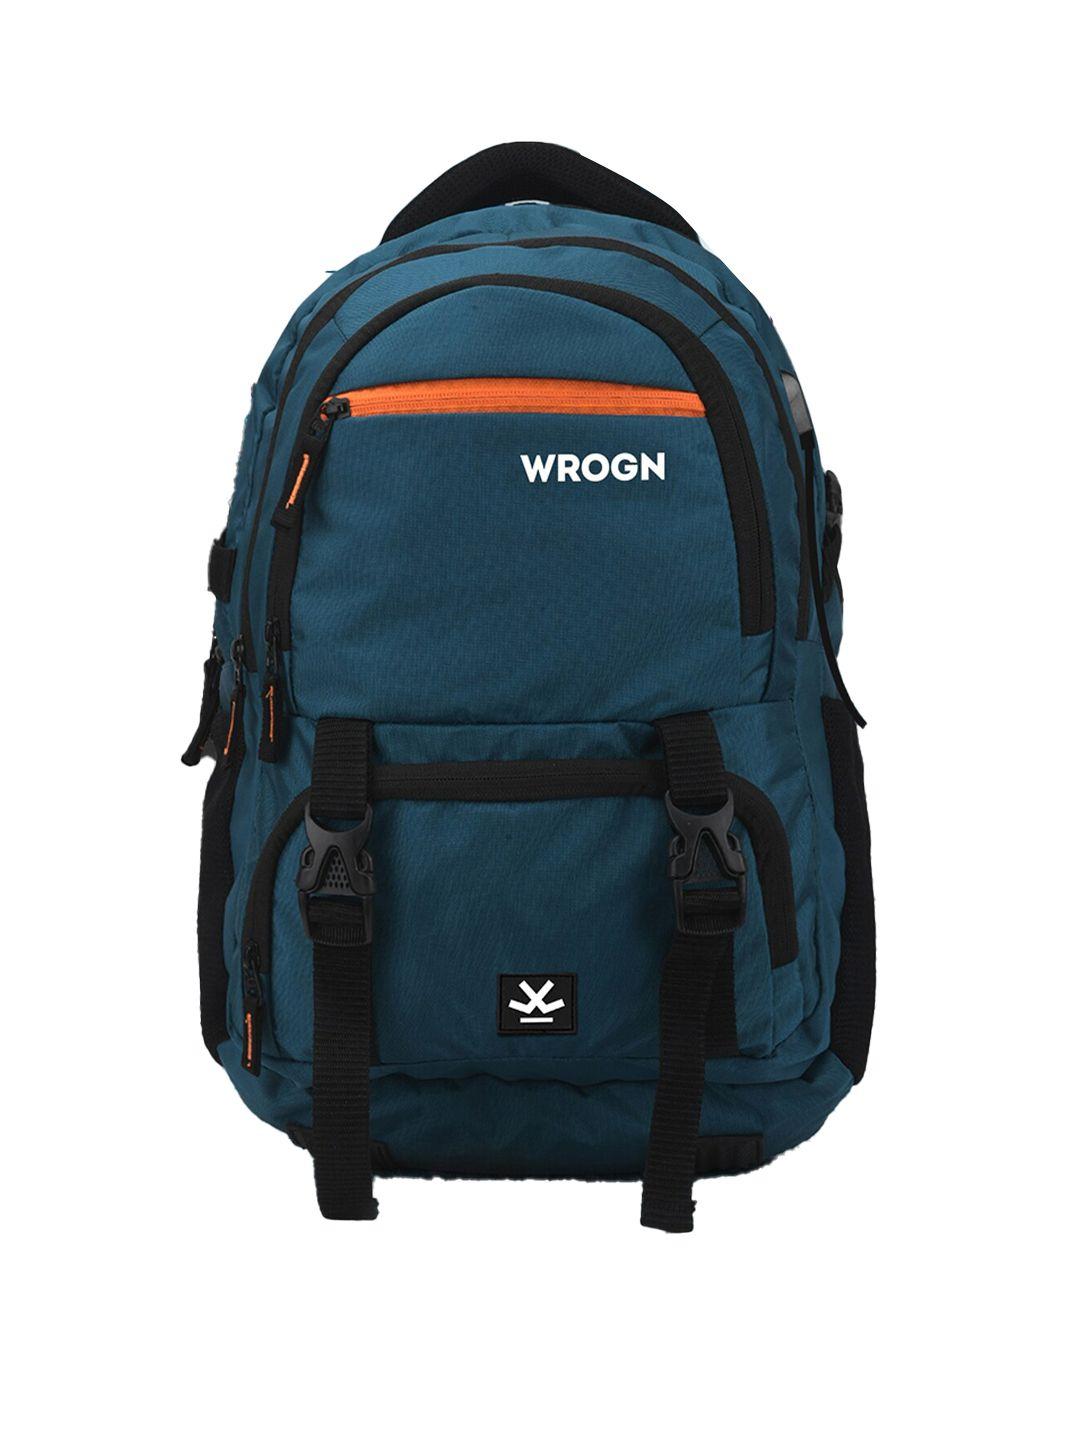 wrogn printed usb charging port reflective strip large backpack with rain cover